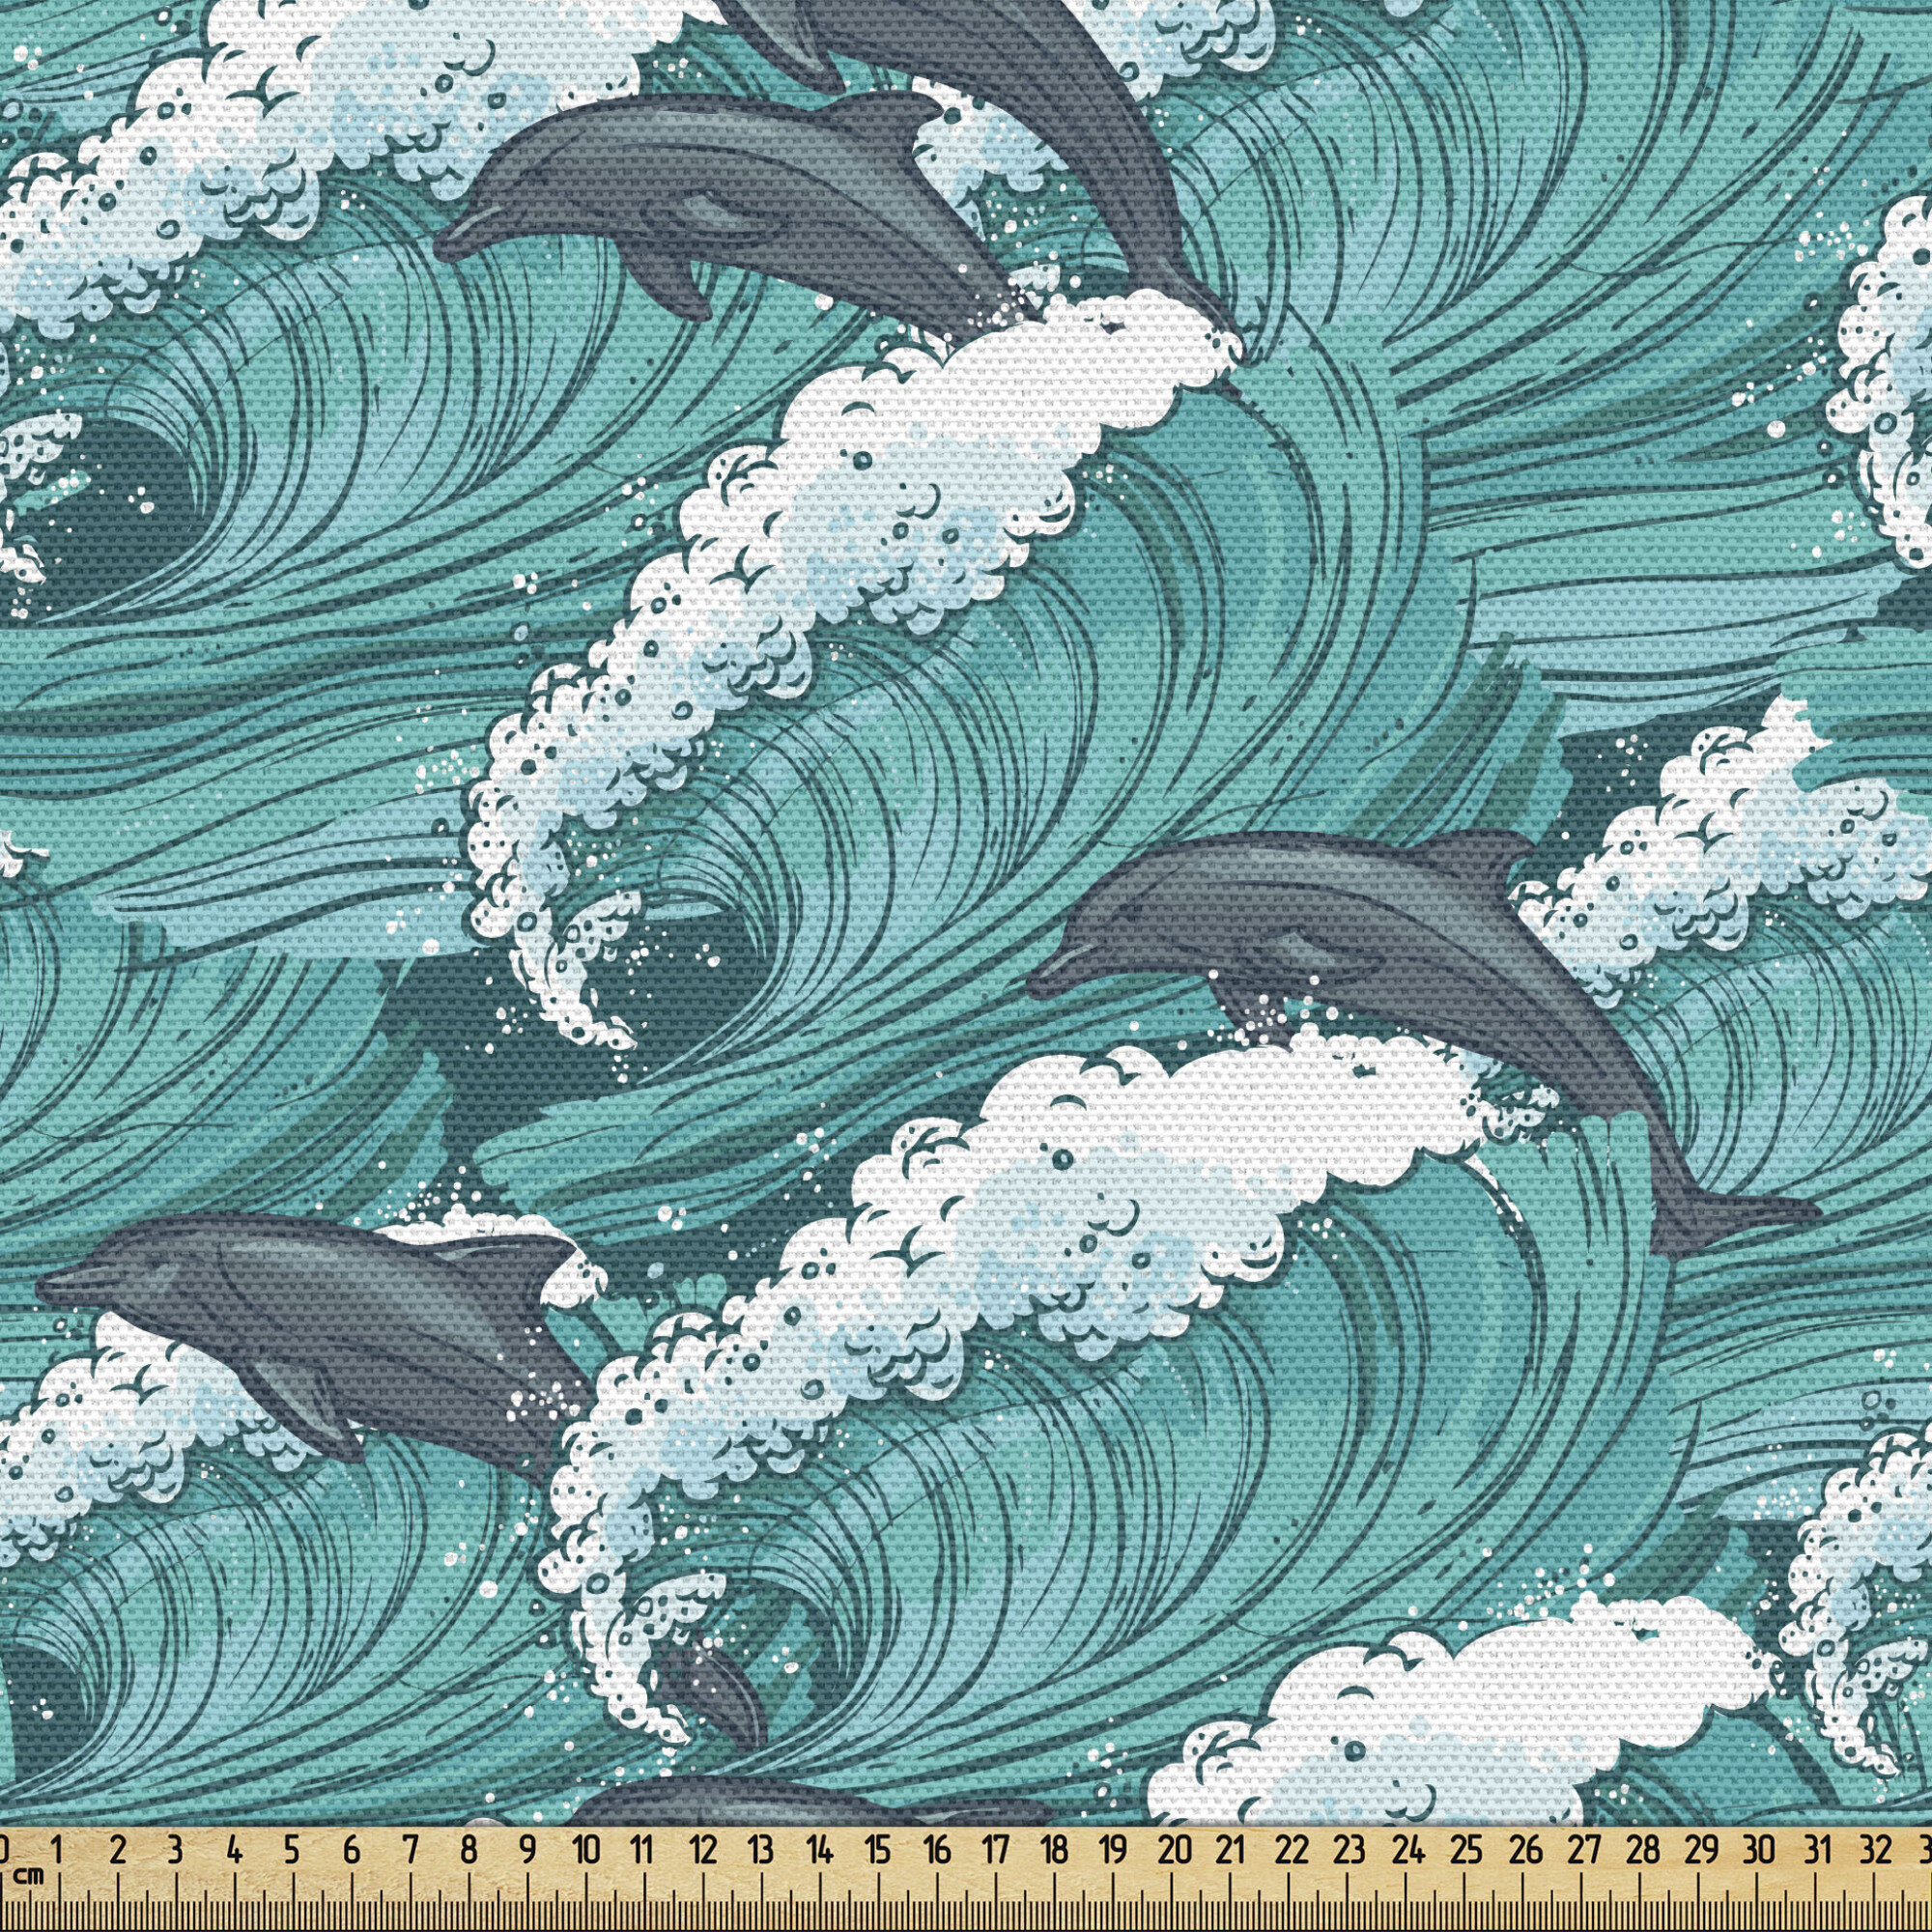 Bless international Sea Animals Fabric By The Yard, Wavy Ocean With  Dolphins Windy Surfing Doodle Style Art Print, Decorative Fabric For  Upholstery And Home Accents,Charcoal Grey Teal White | Wayfair